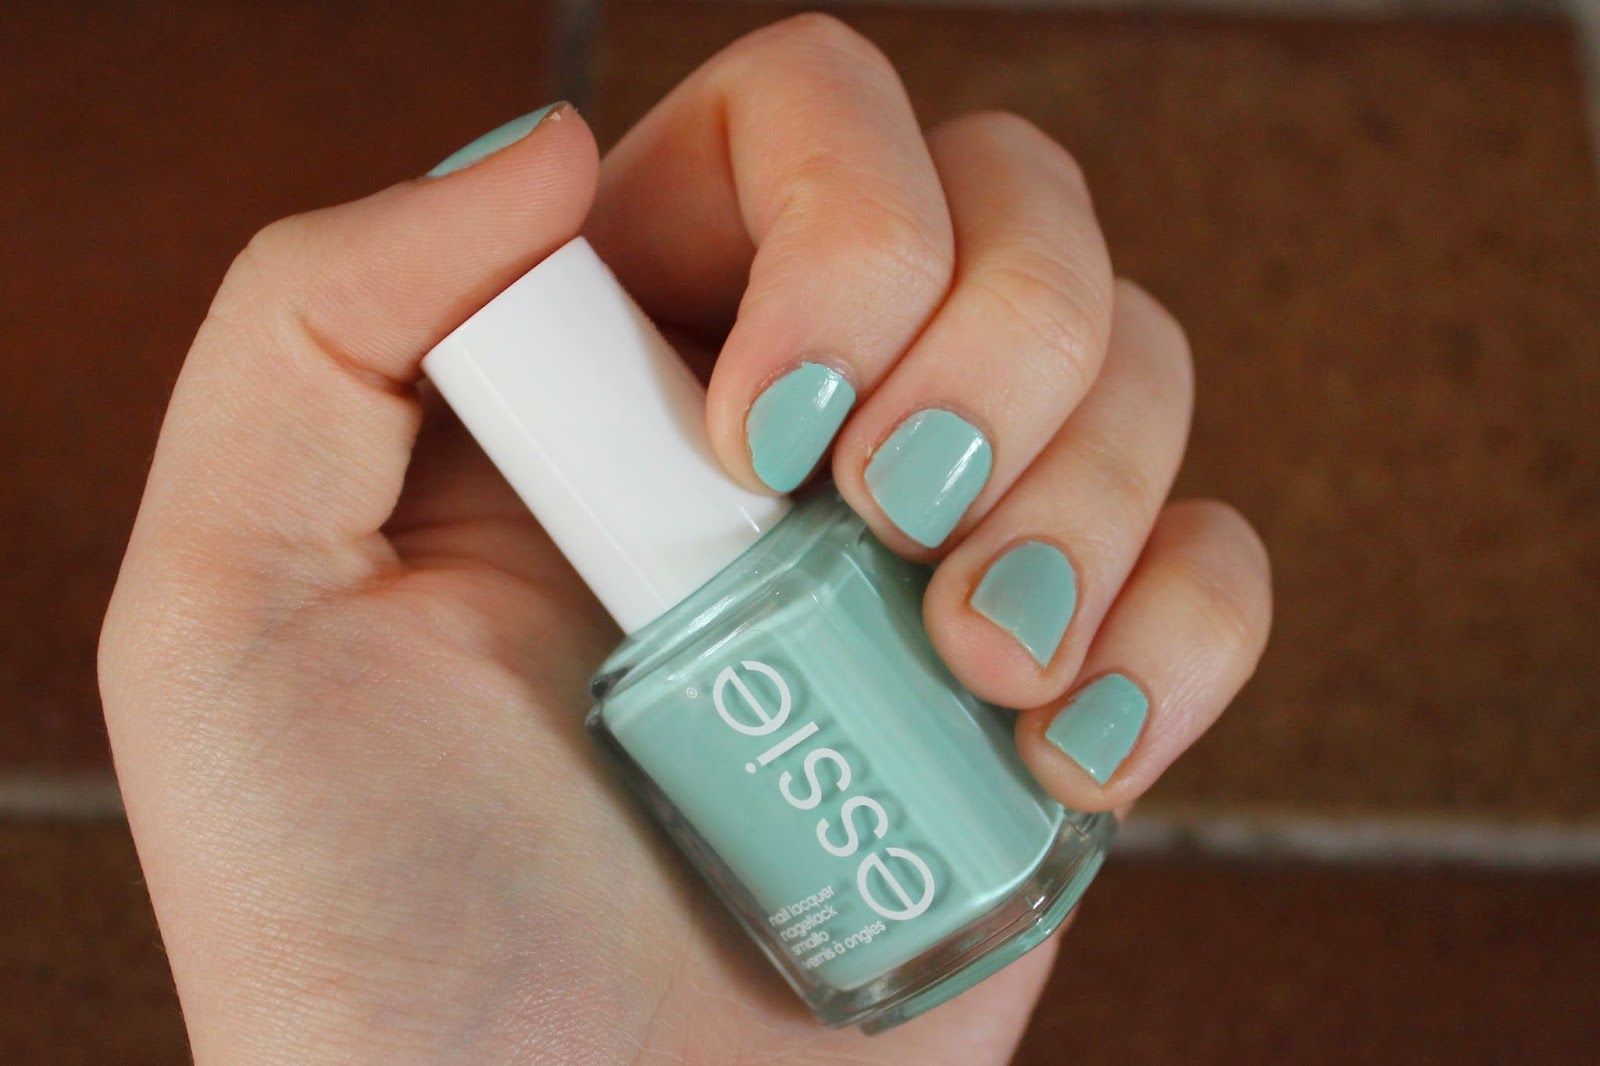 Essie Nail Polish in Mint Candy Apple - wide 6